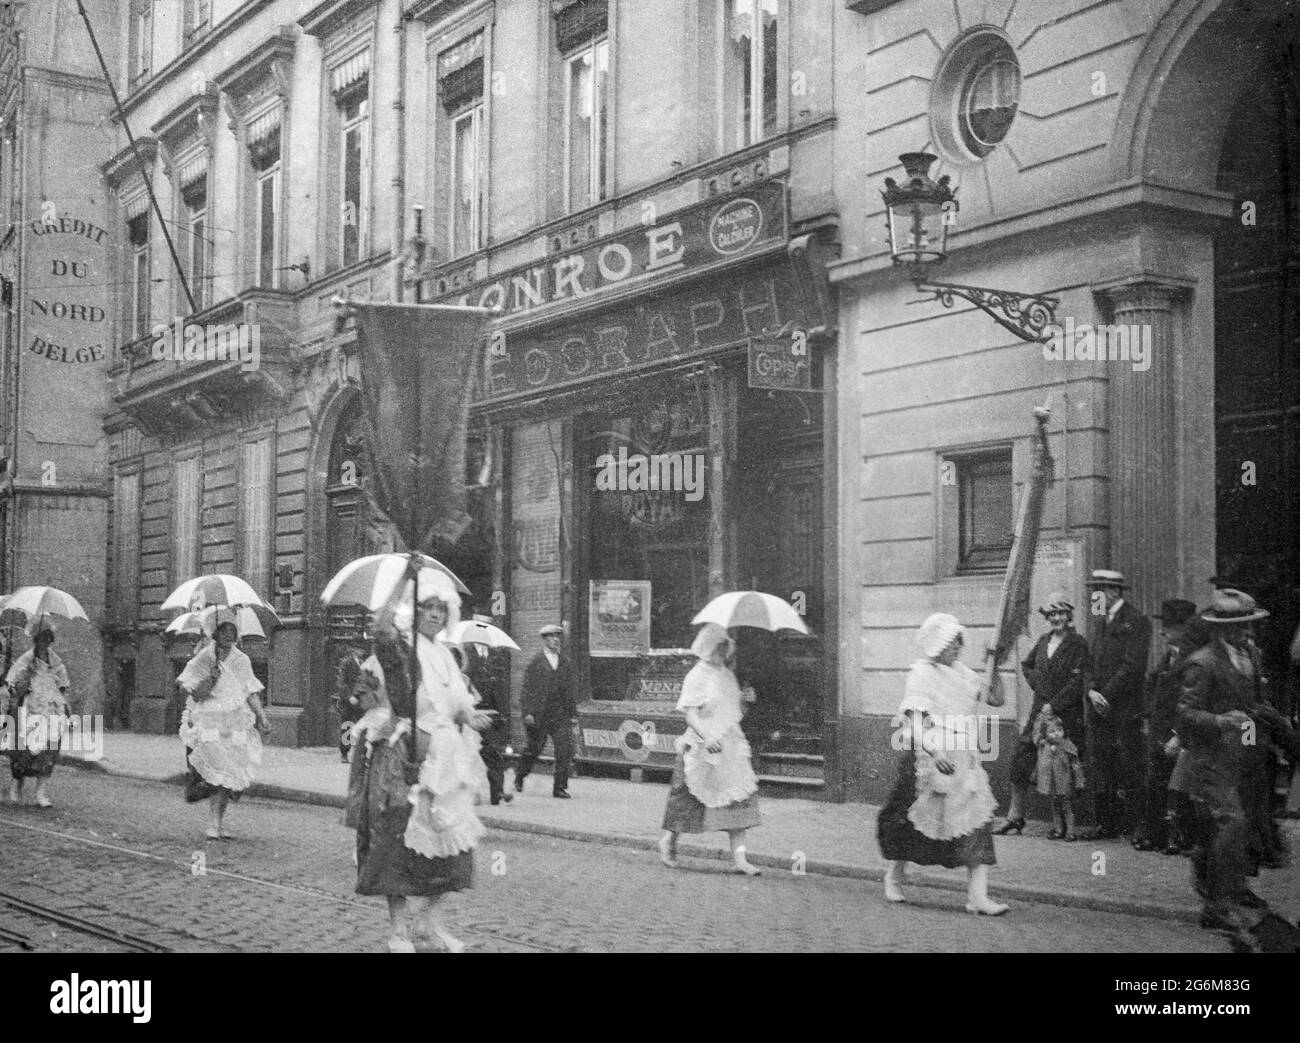 A vintage early 20th century black and white photograph taken in Brussels, Belgium. Image shows women carrying umbrellas, marching or demonstrating down a street. Stock Photo